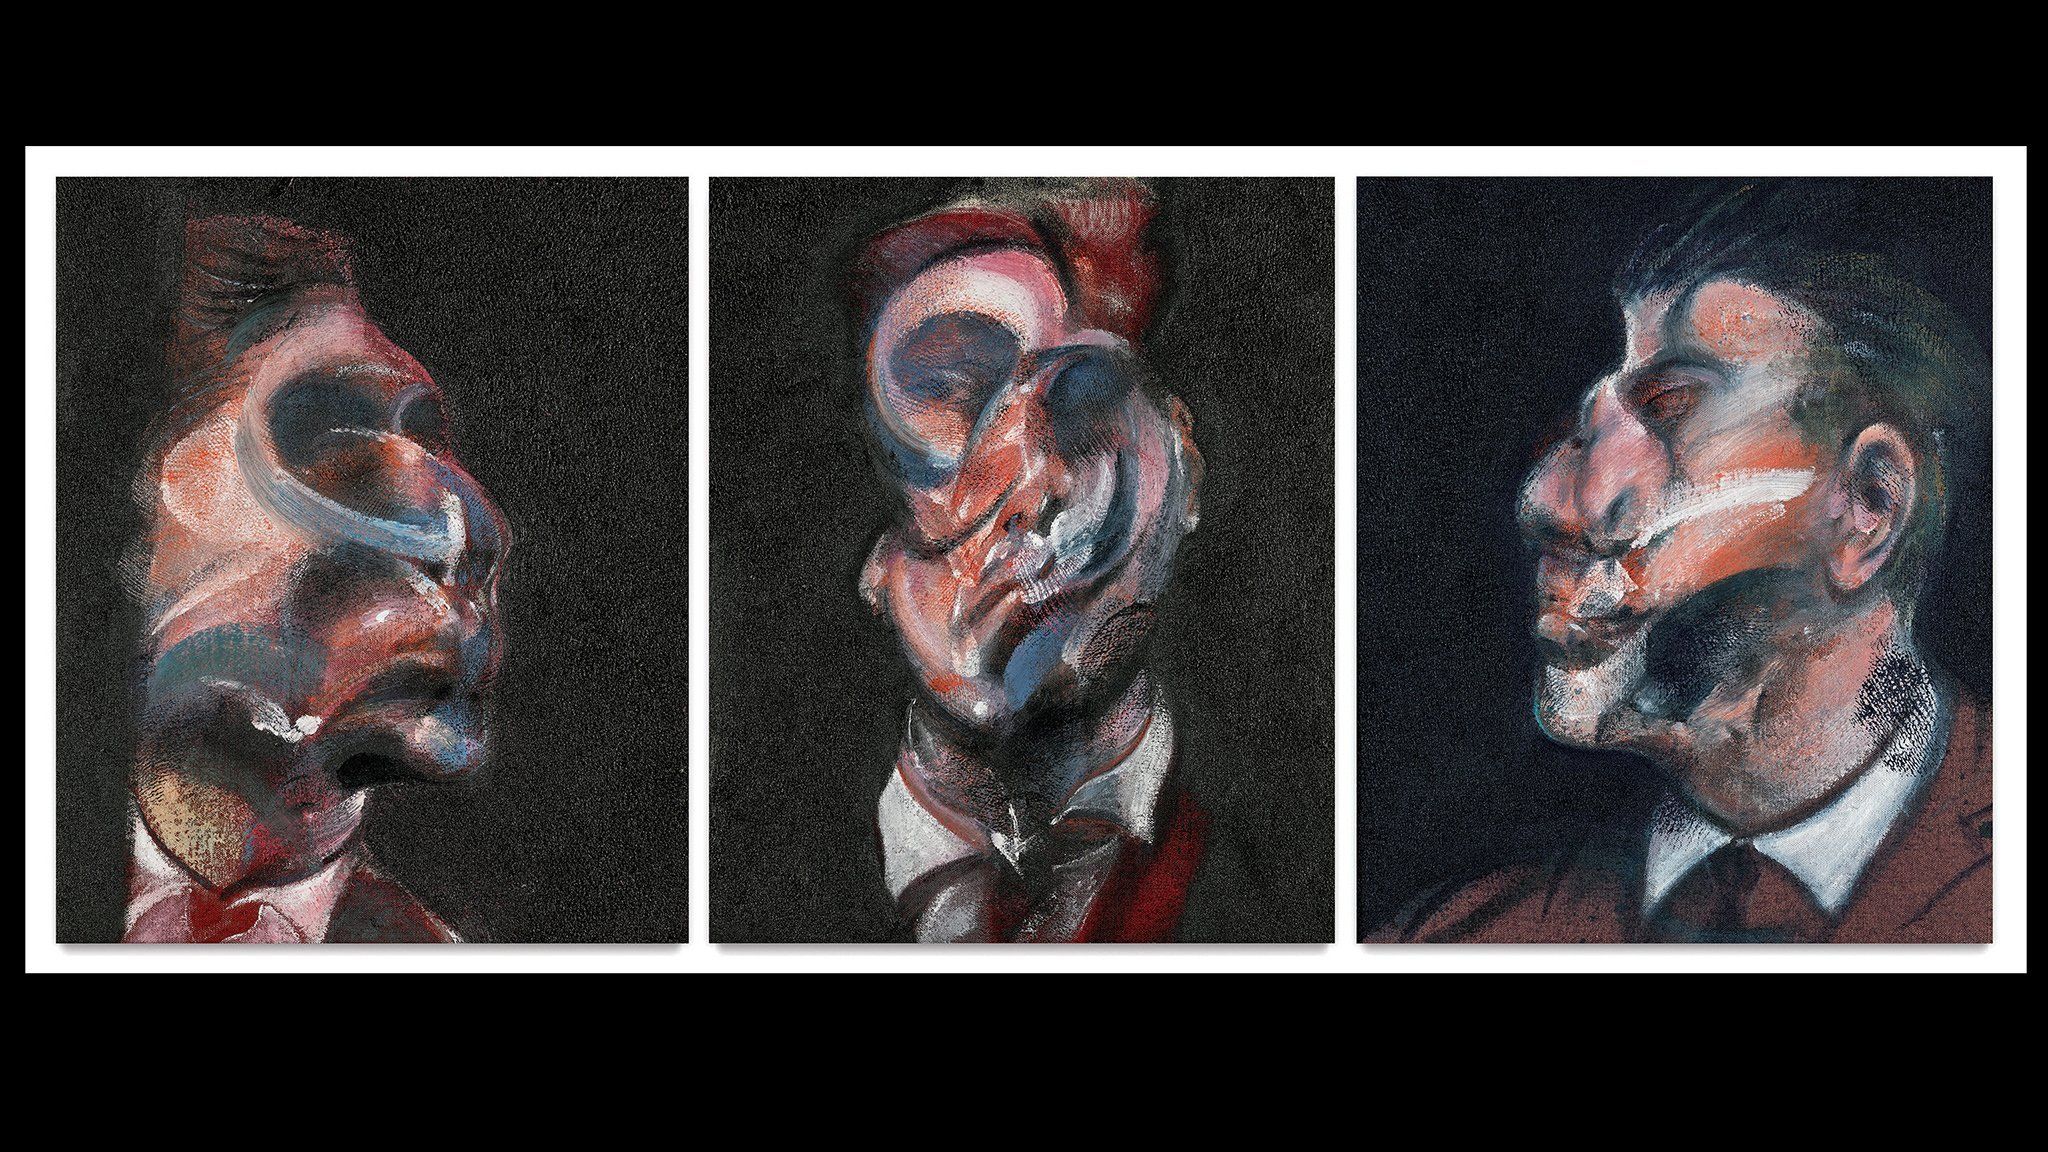 Francis Bacon triptych on show for first time in 50 years